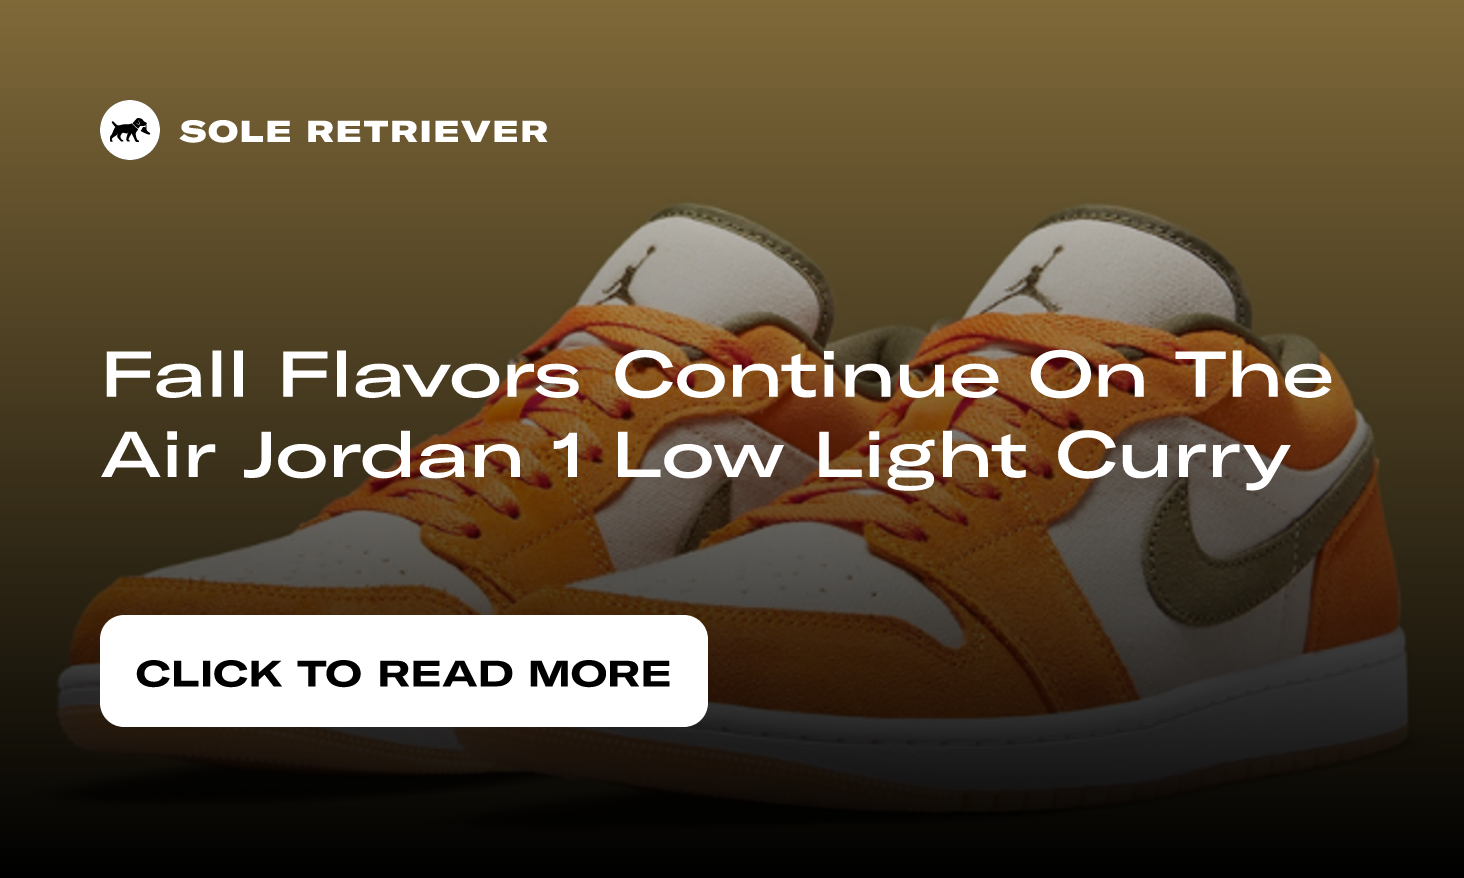 Fall Flavors Continue On The Air Jordan 1 Low Light Curry